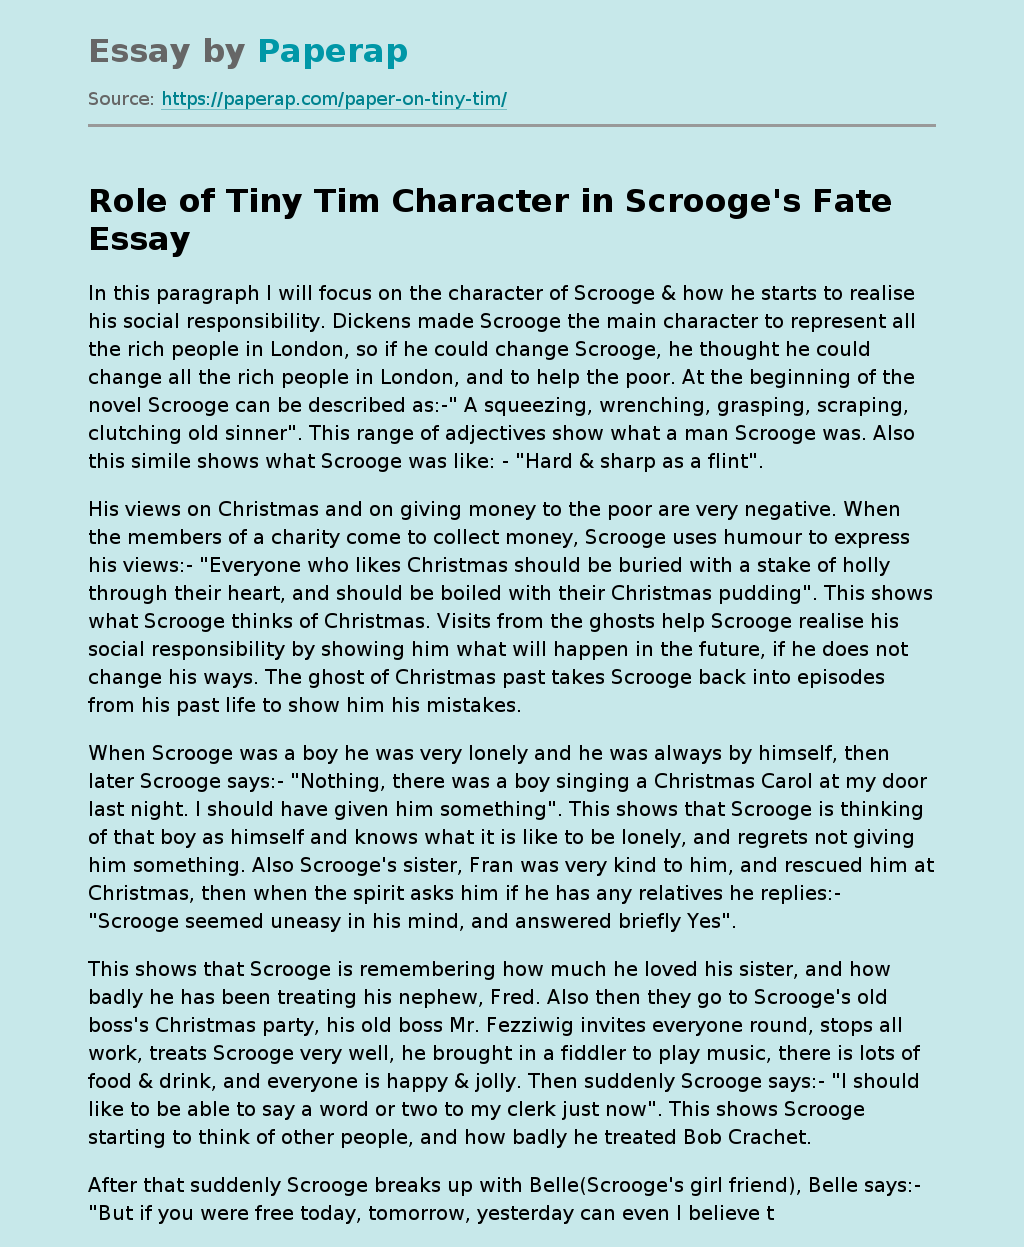 Role of Tiny Tim Character in Scrooge's Fate